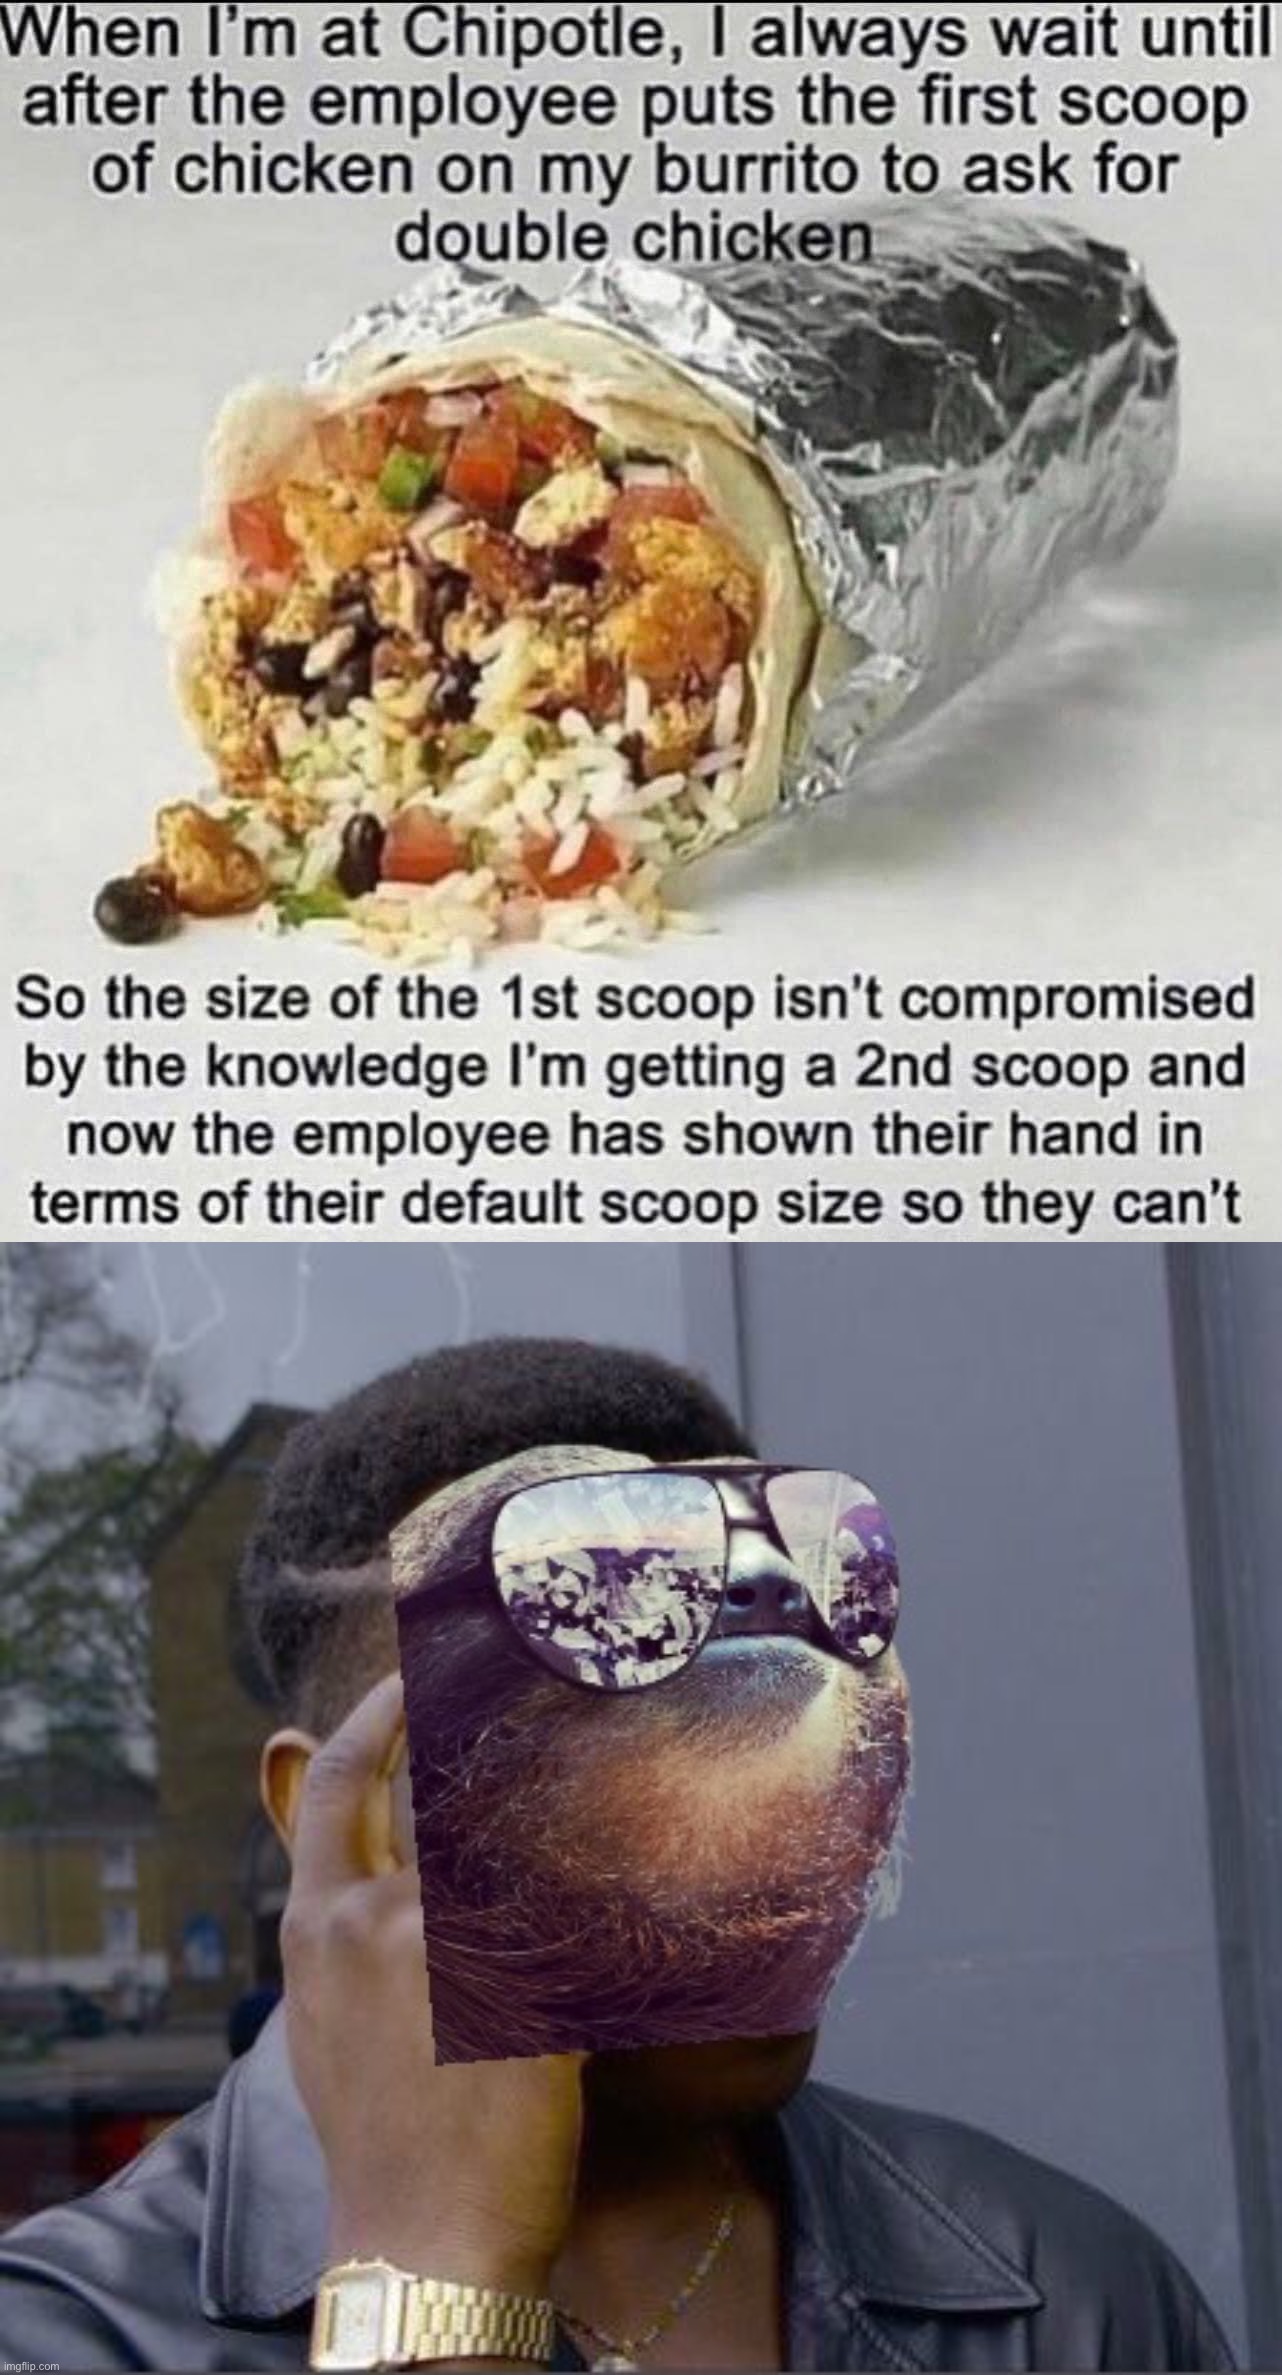 Work smarter not harder out there | image tagged in chipotle gaming the system,sloth roll safe think about it,work,smarter,not,harder | made w/ Imgflip meme maker